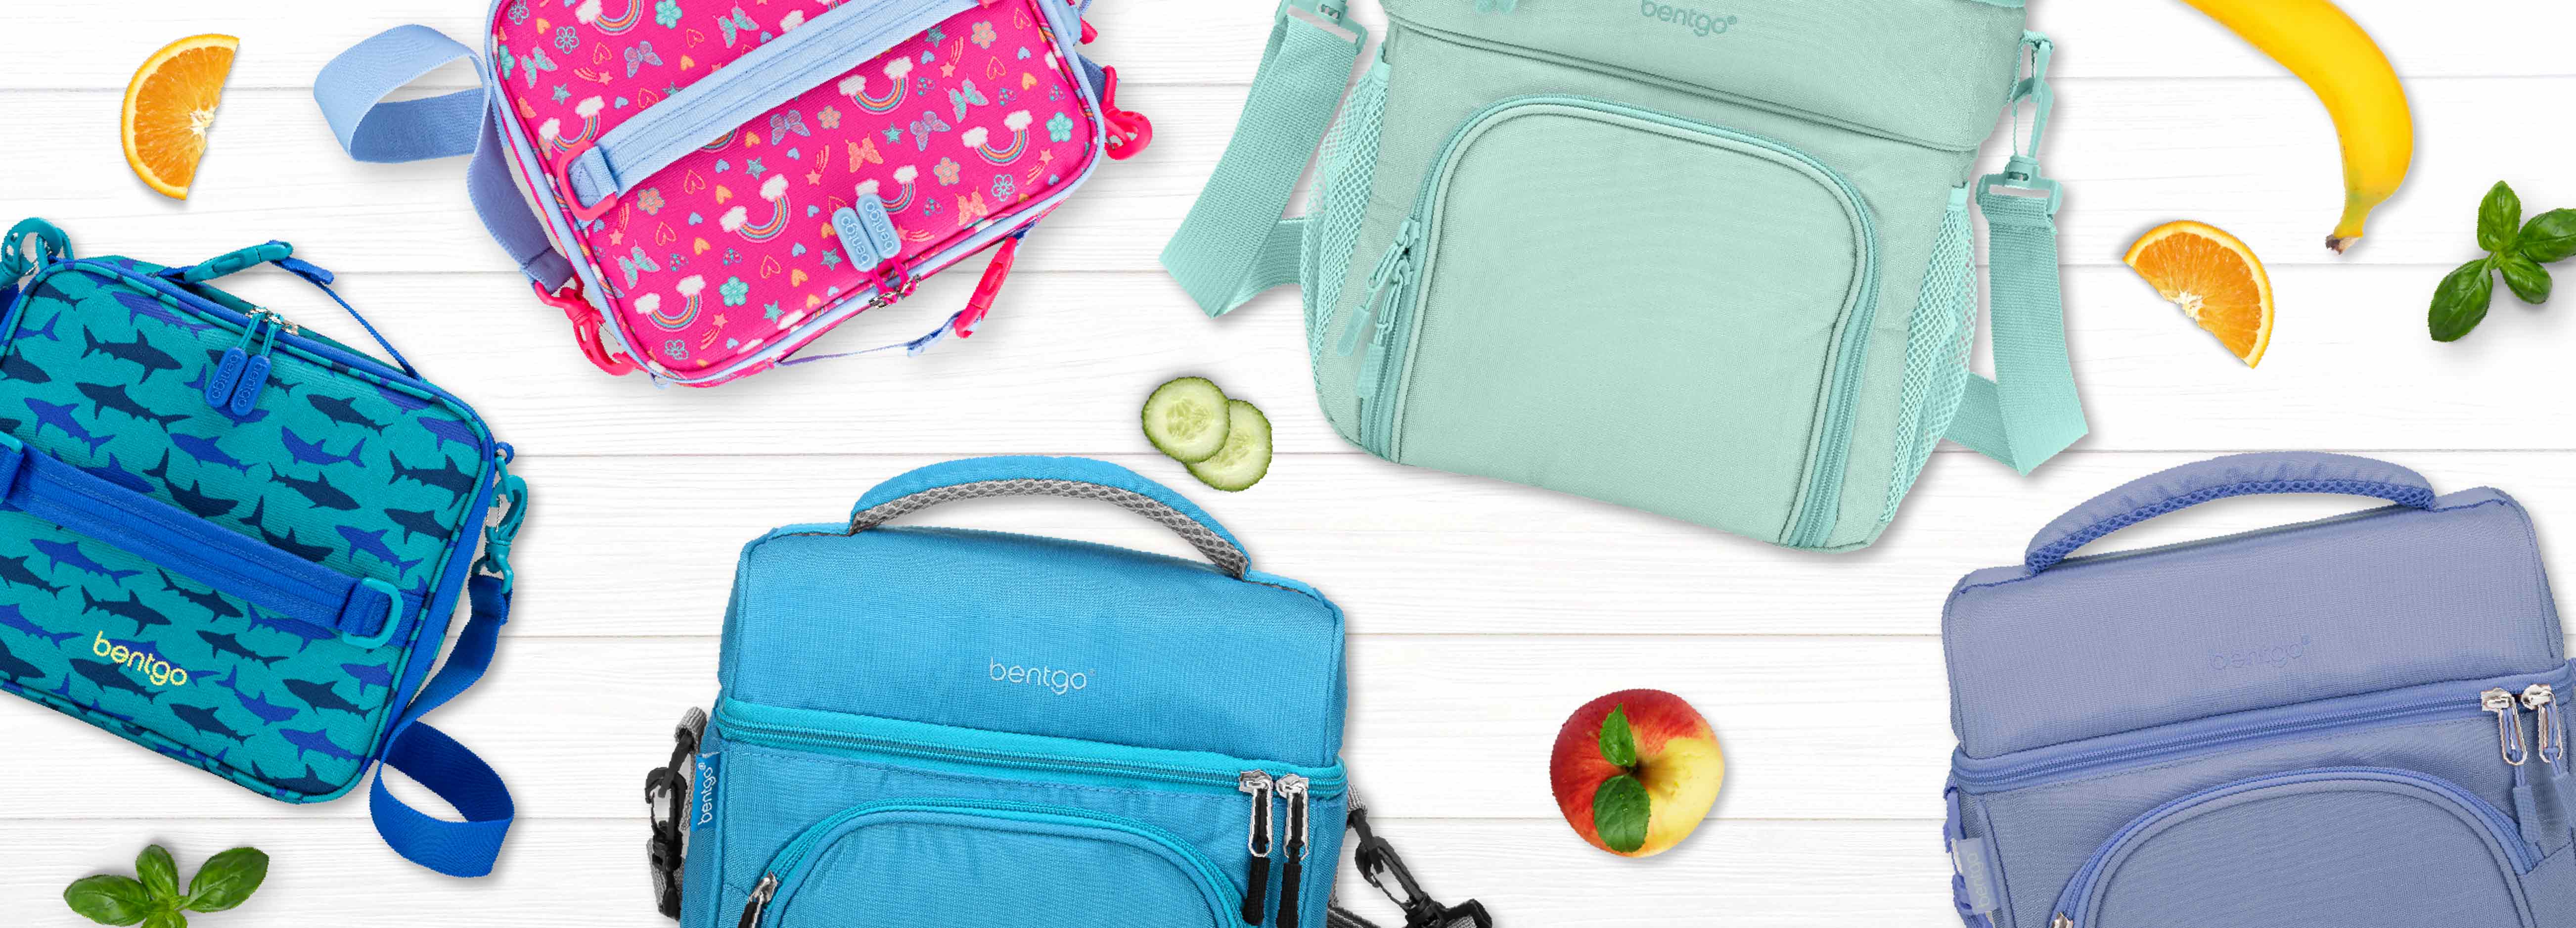 76% OFF on Insulated Lunch Box Bag F40C4TMP Soft Cooler With Pocket on  Amazon | PaisaWapas.com